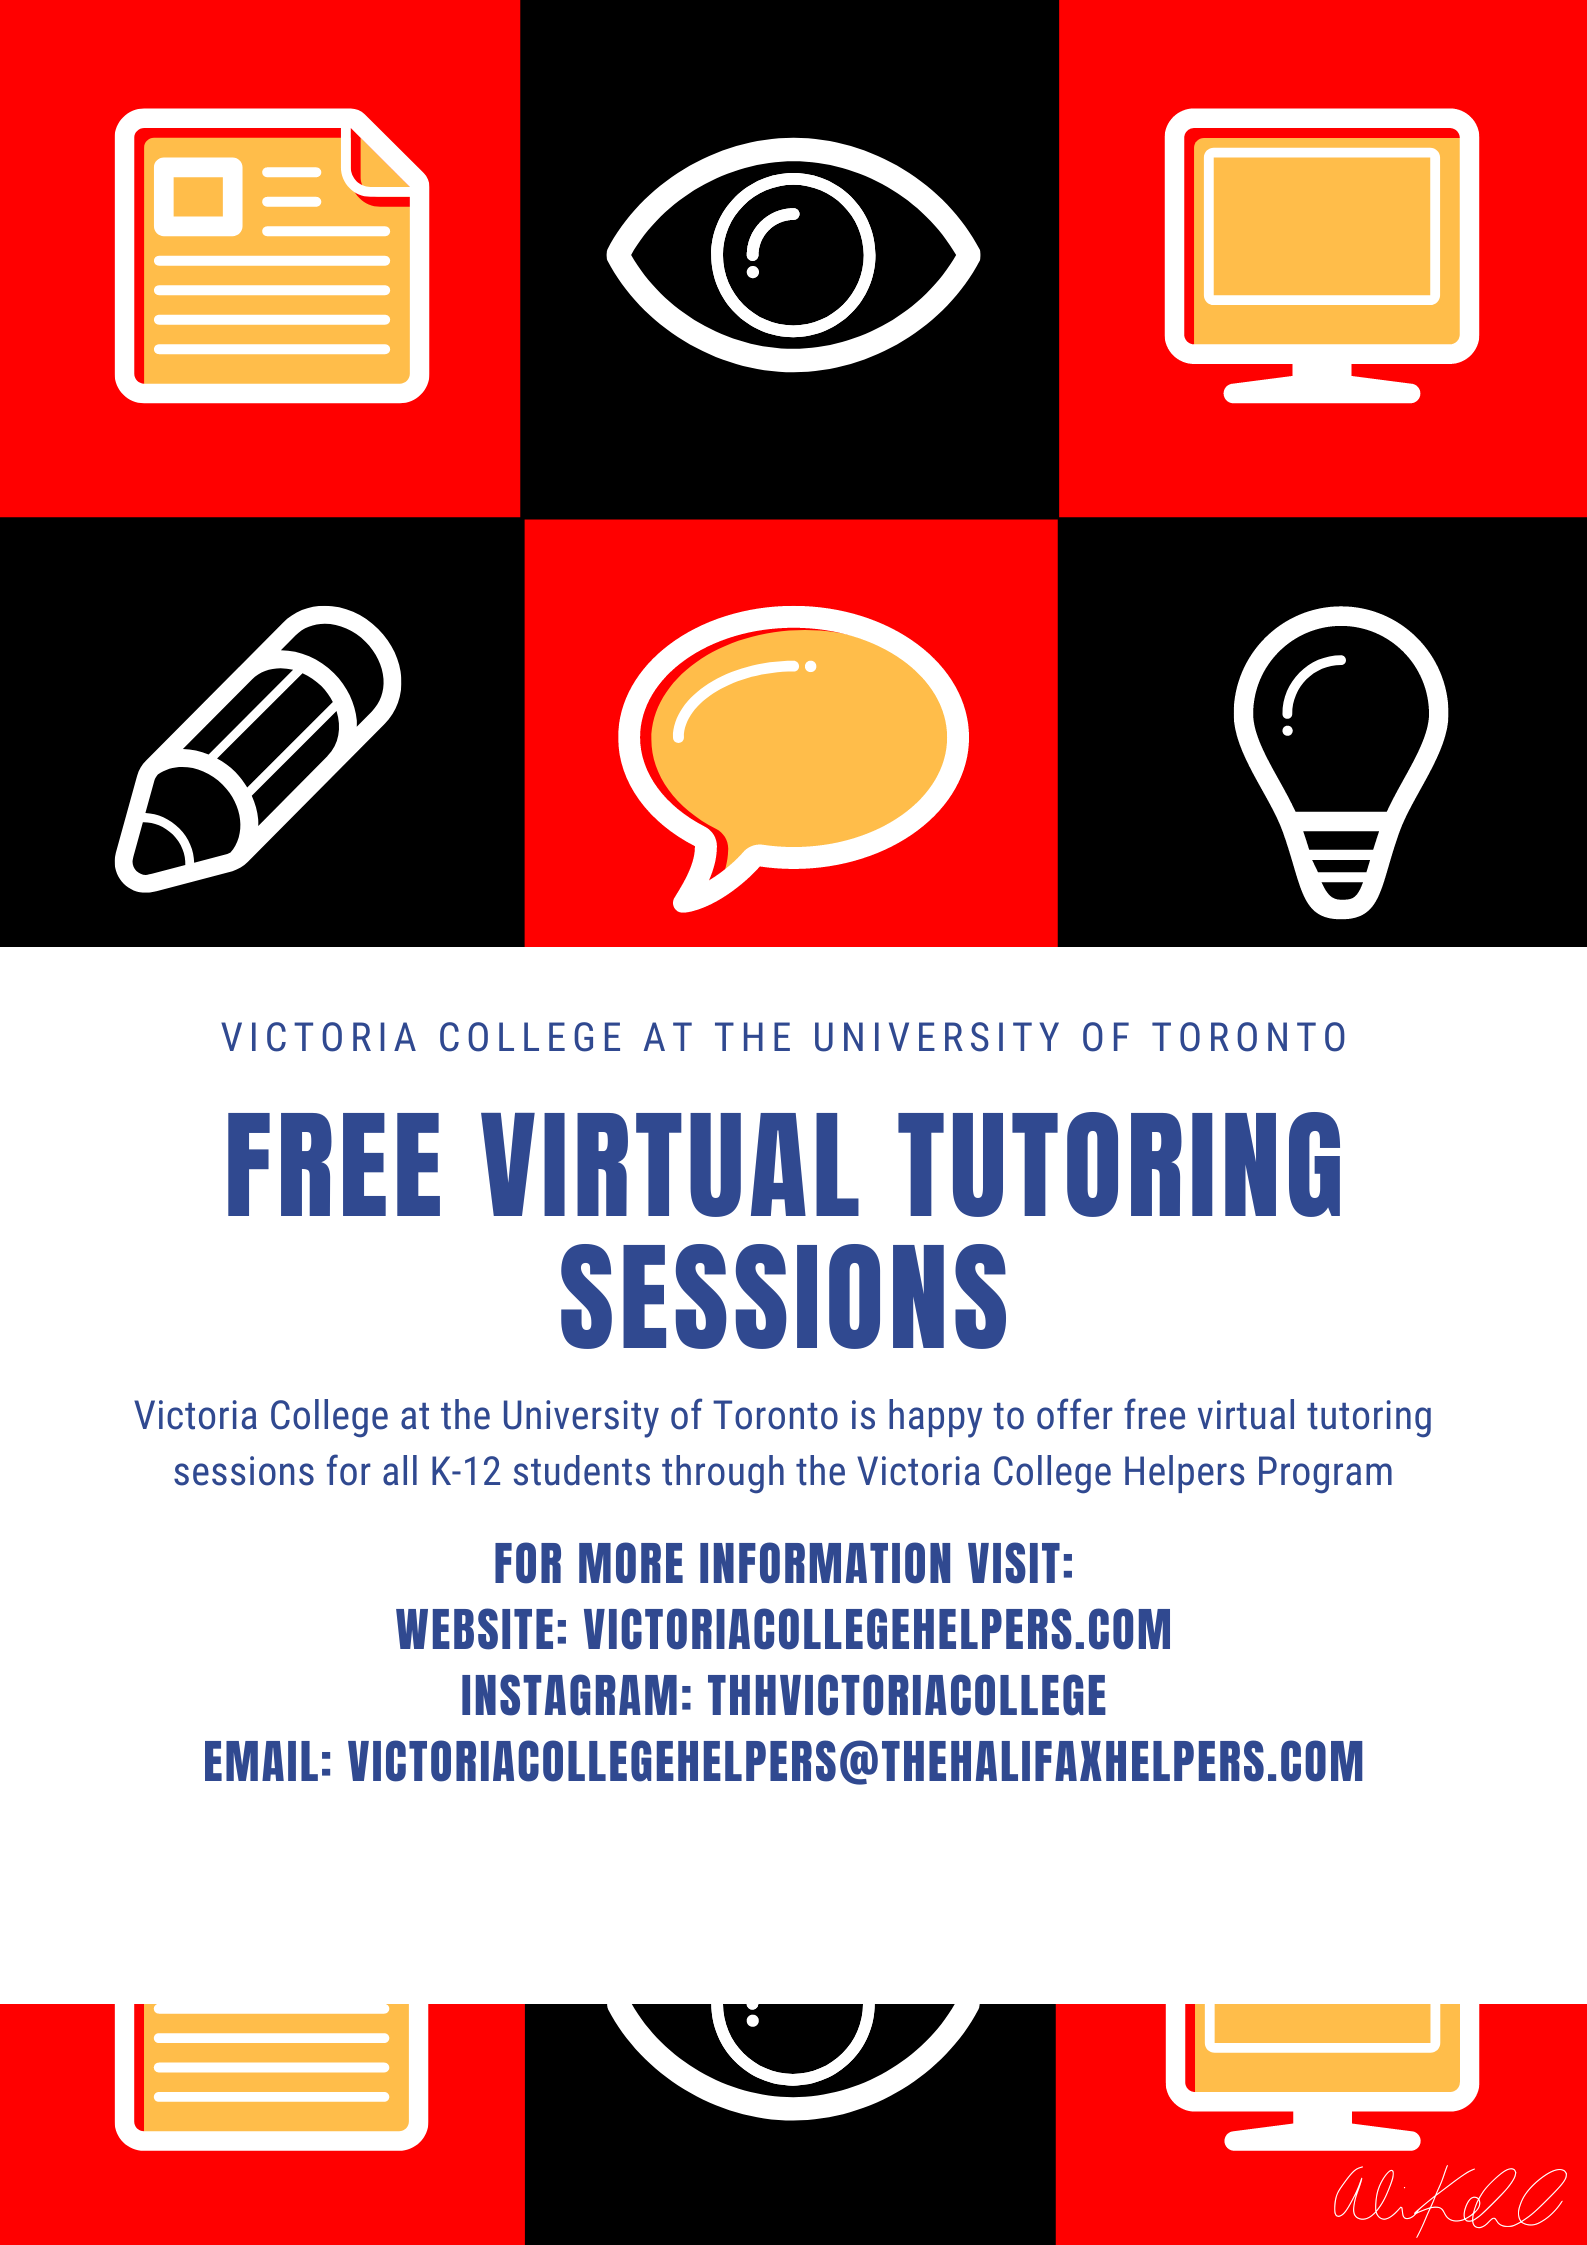 Text that says: Victoria College at the University of Toronto. Free Virtual Tutoring Sessions. Victoria College at the University of Toronto is happy to offer free virtual tutoring sessions for all K-12 students through the Victoria College Helpers Program. For more information visit: Website - victoriacollegehelpers.com, INSTAGRAM: thhvictoria college; email: victoriacollegehelpers@thehalifaxhelpers.com